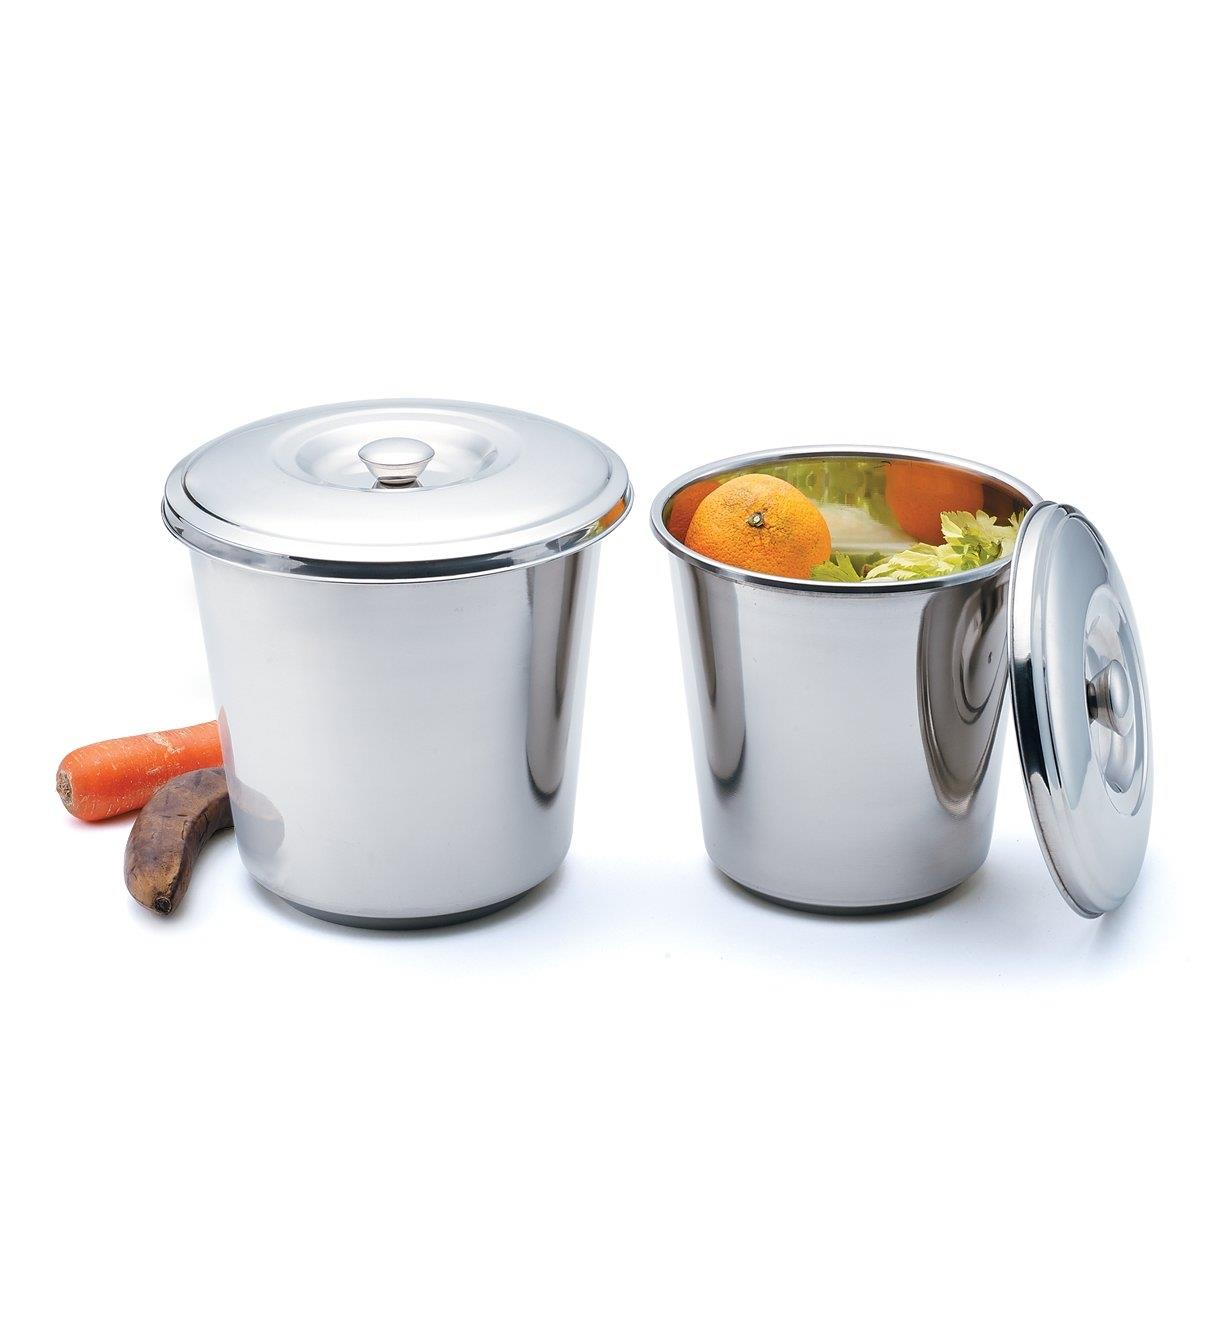 XG167 - Set of Stainless Steel Buckets